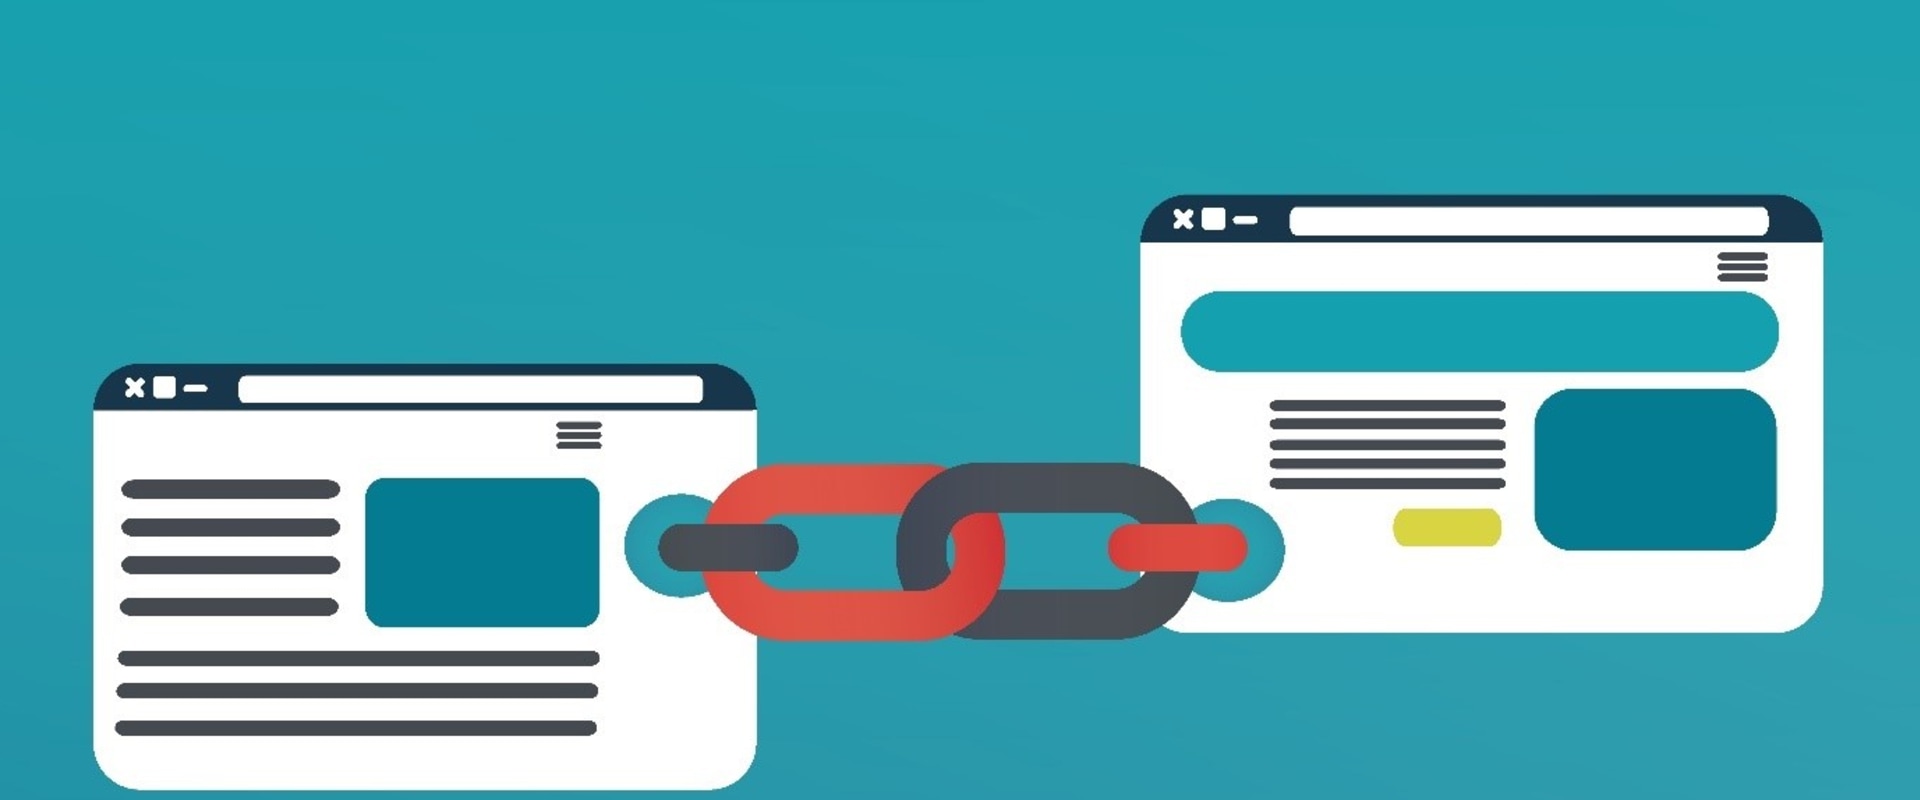 What are examples of backlinks?